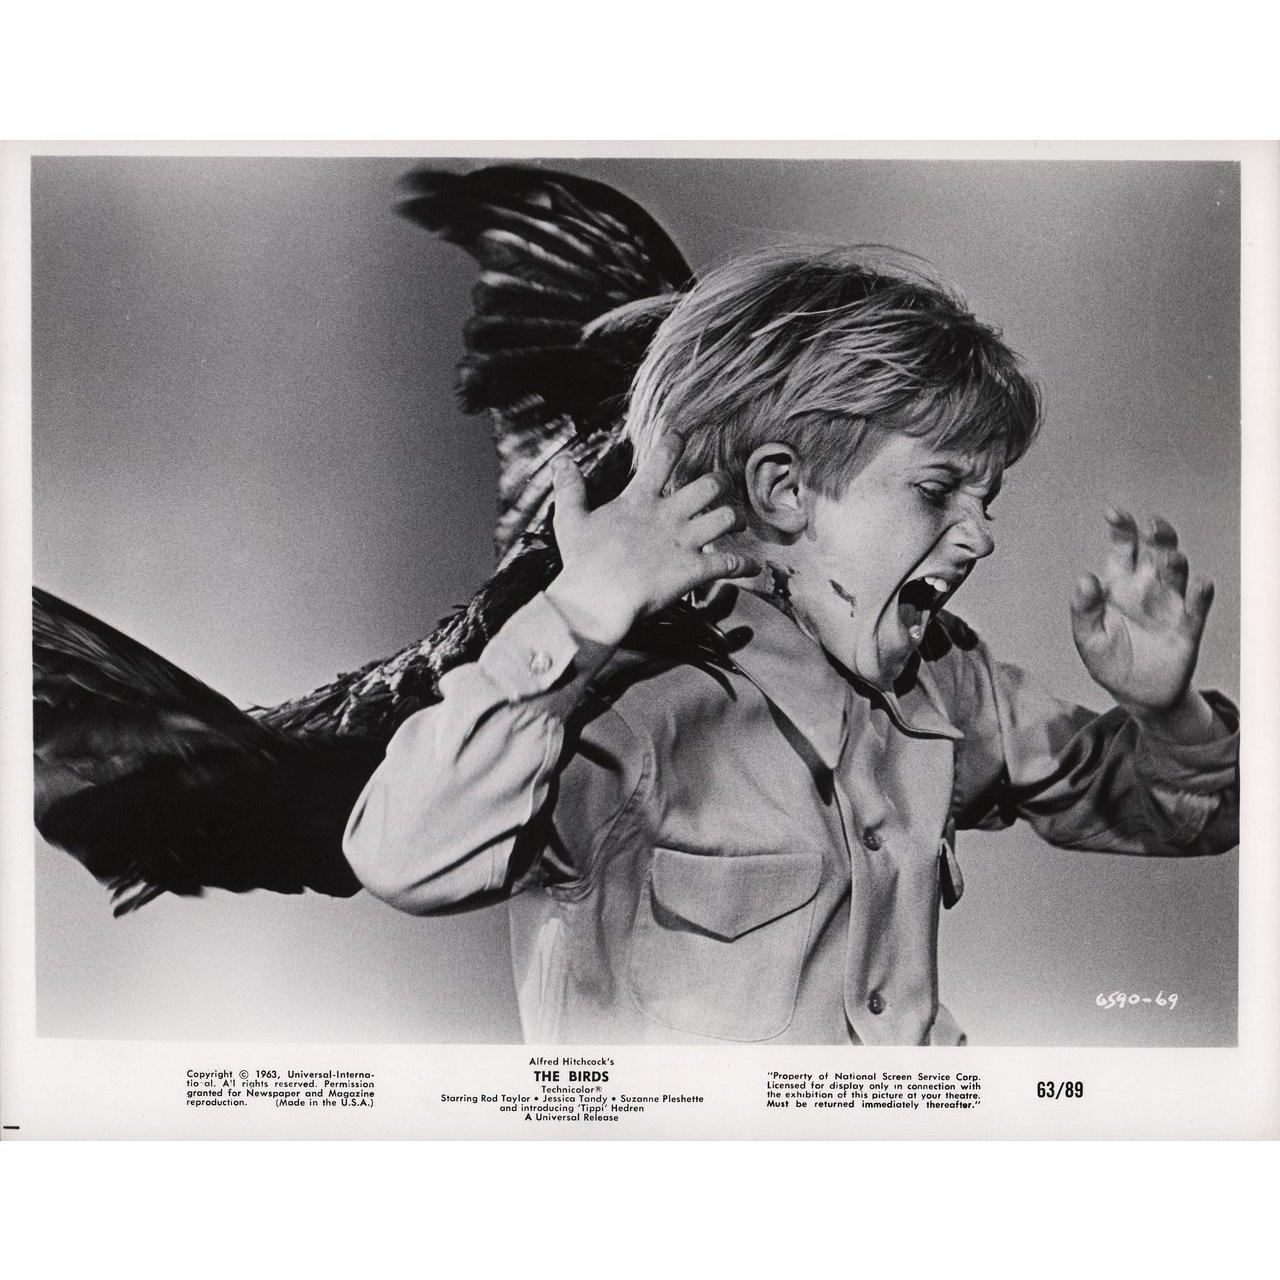 Original 1963 U.S. silver gelatin single-weight photo for the film “The Birds” directed by Alfred Hitchcock with Tippi Hedren / Suzanne Pleshette / Rod Taylor / Jessica Tandy. Fine condition. Please note: the size is stated in inches and the actual